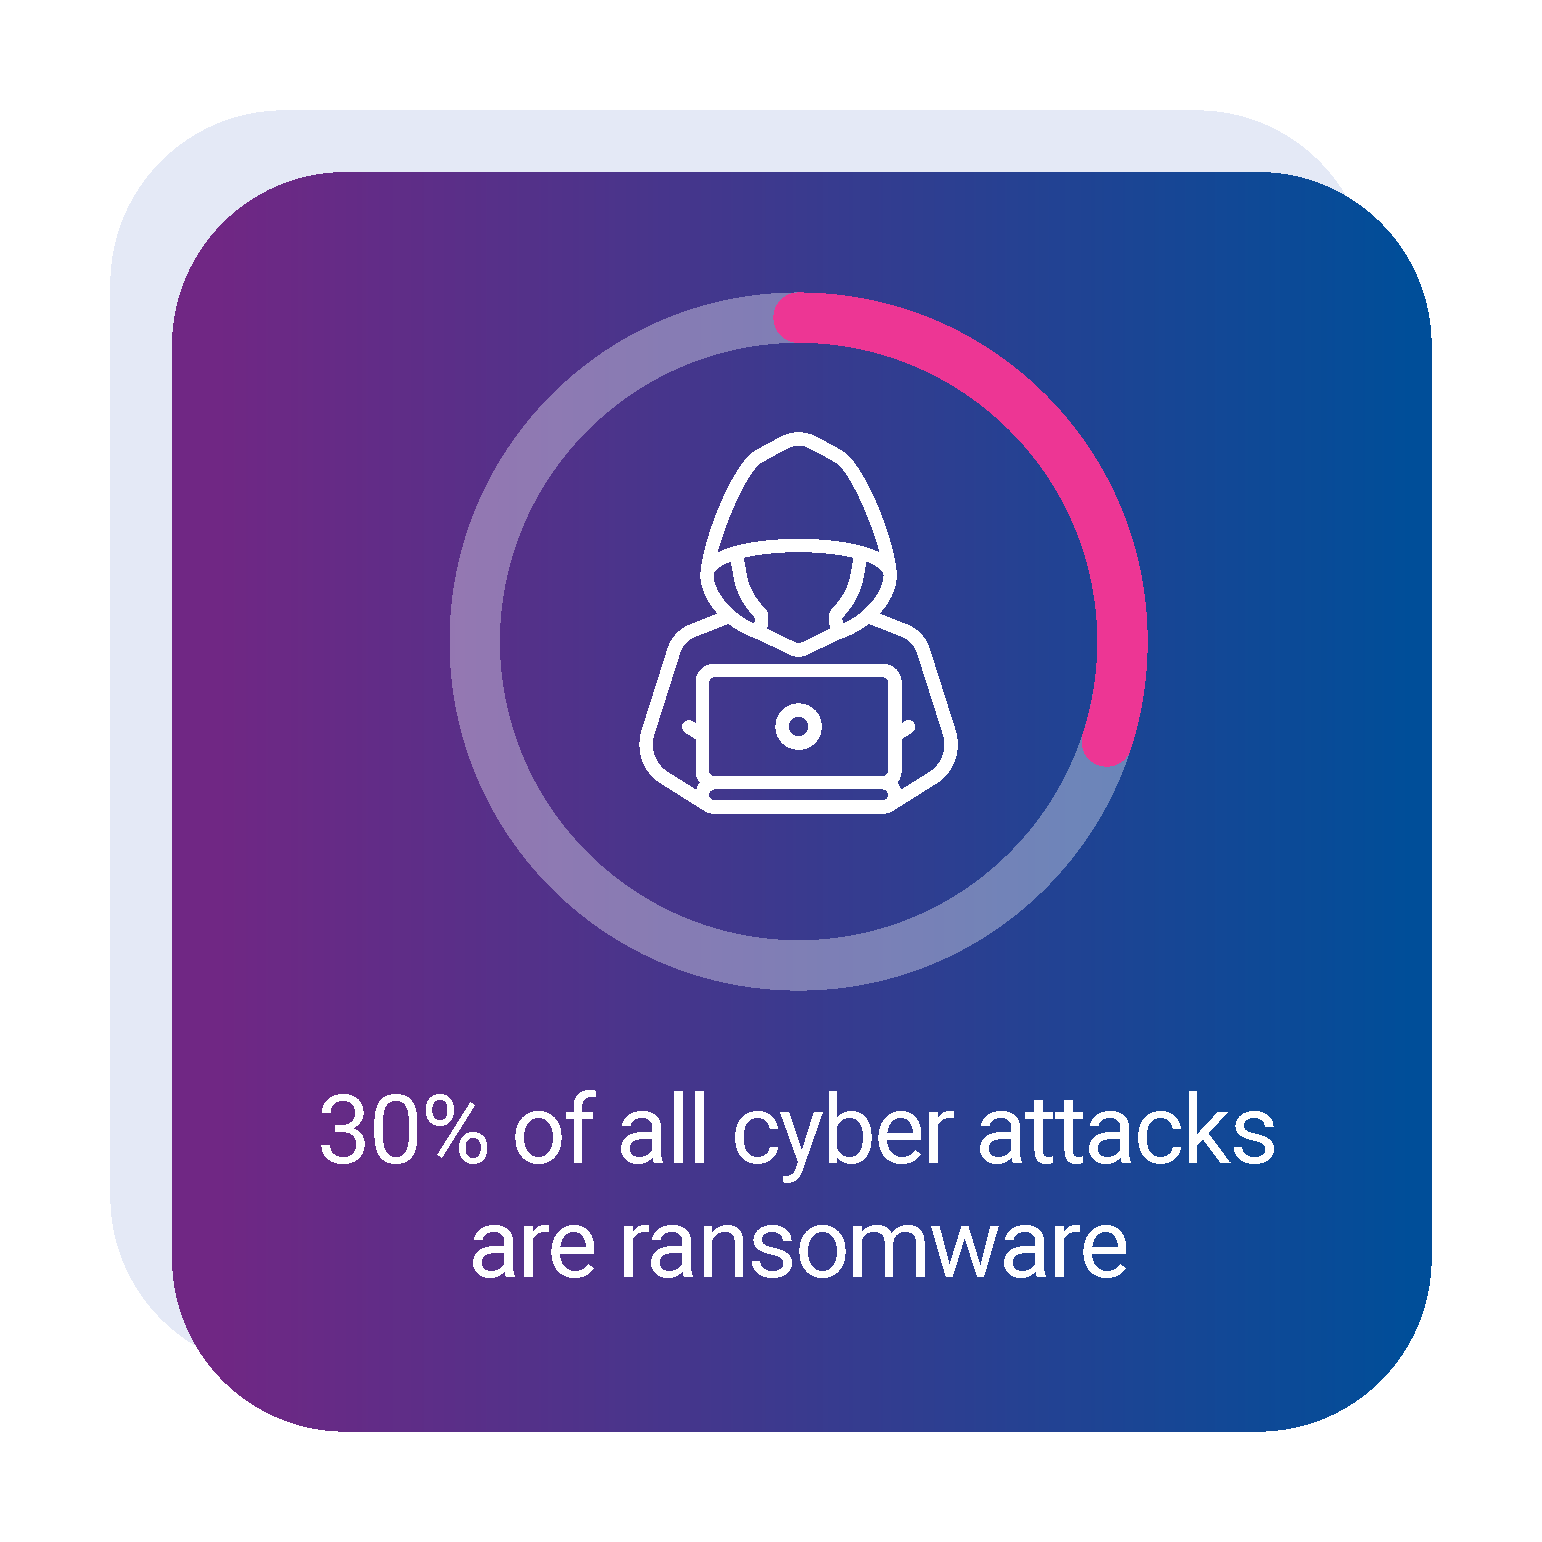 30% of all cyber attacks are ransomware